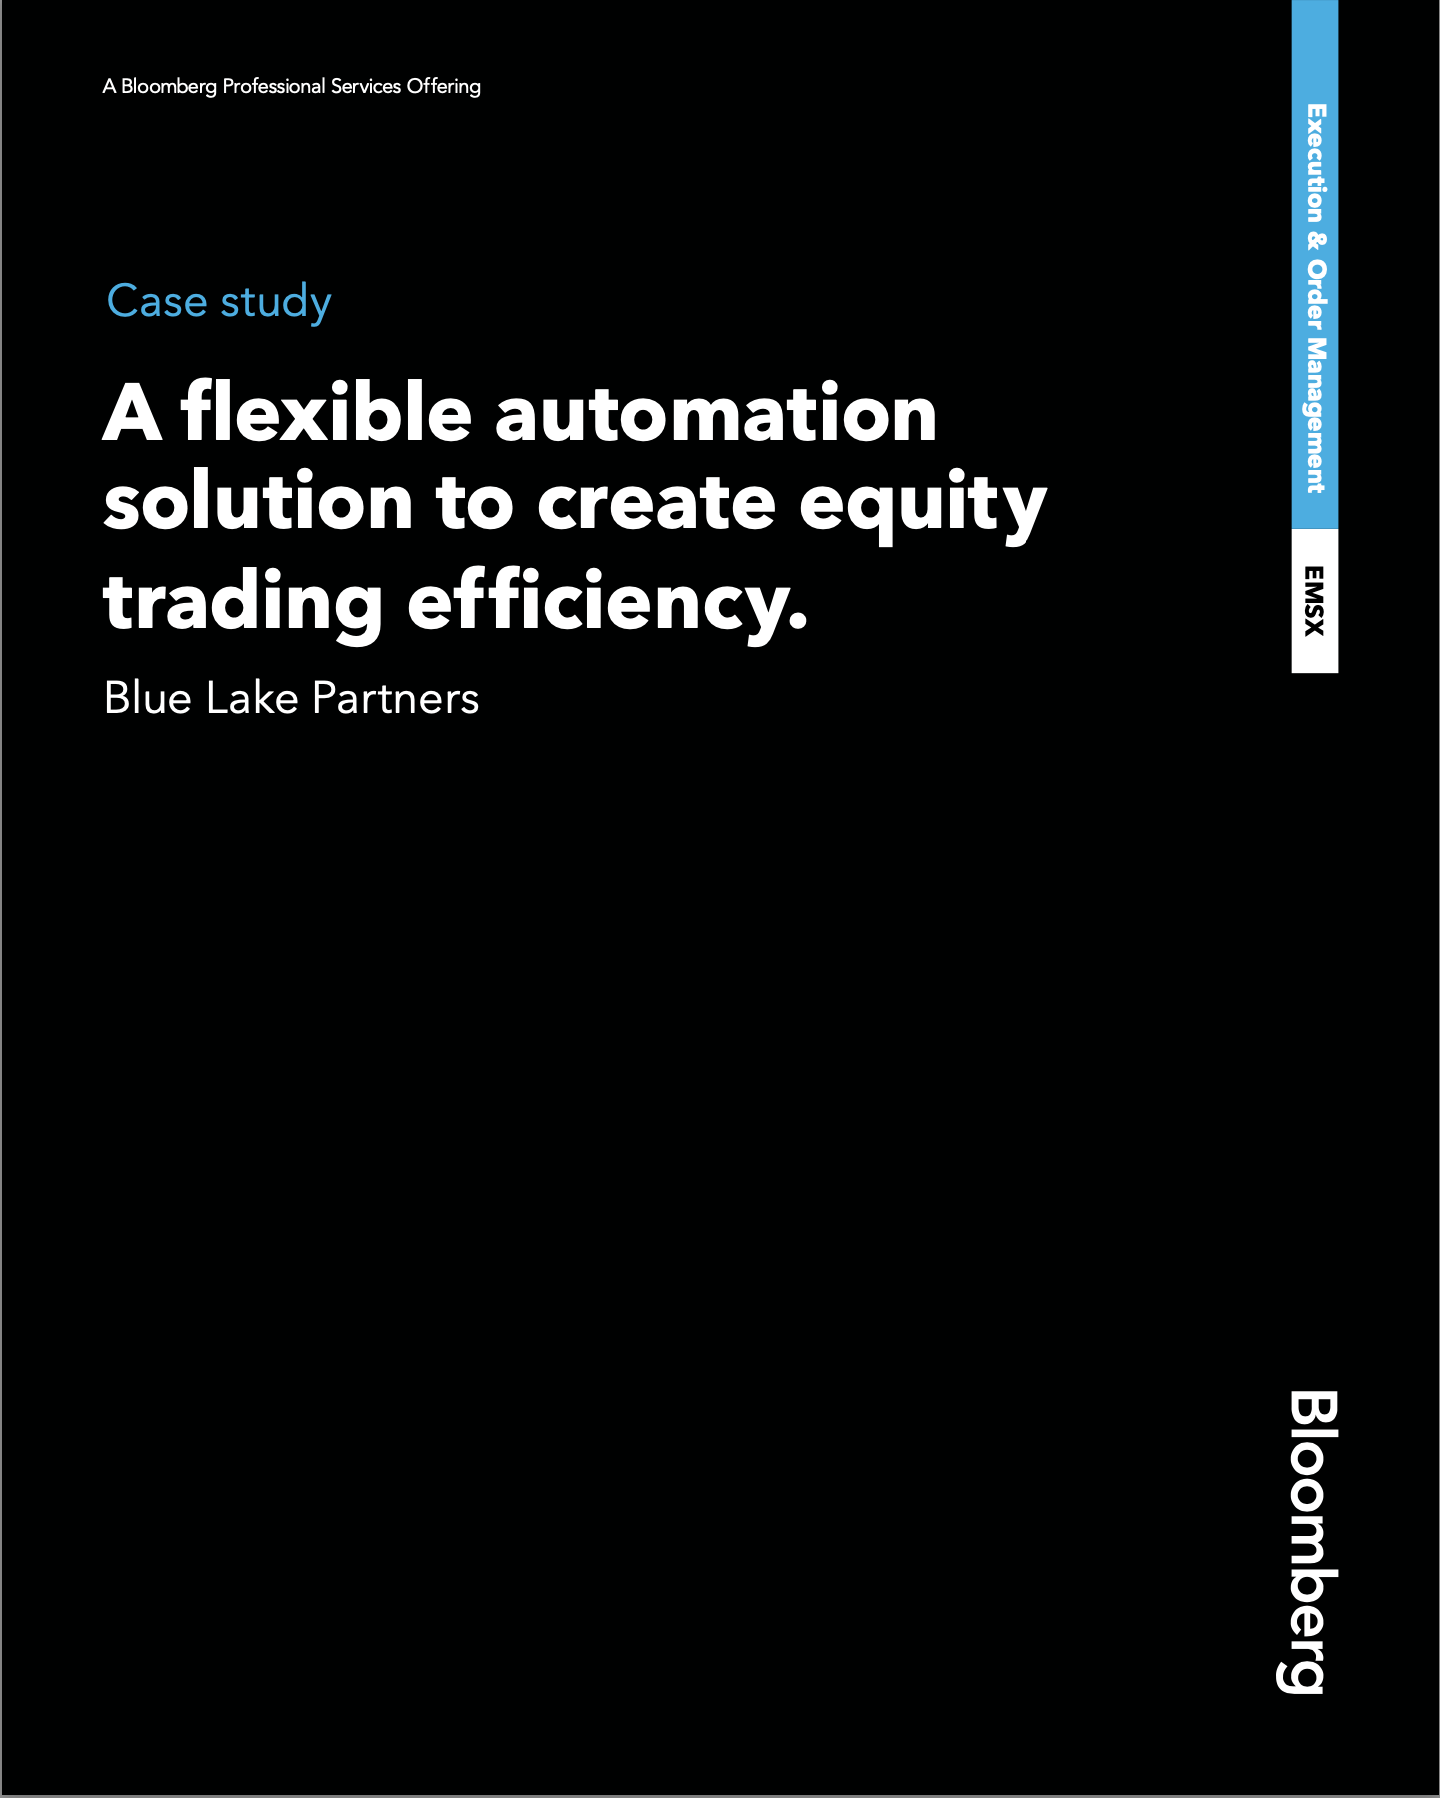 A flexible automation solution to create equity trading efficency